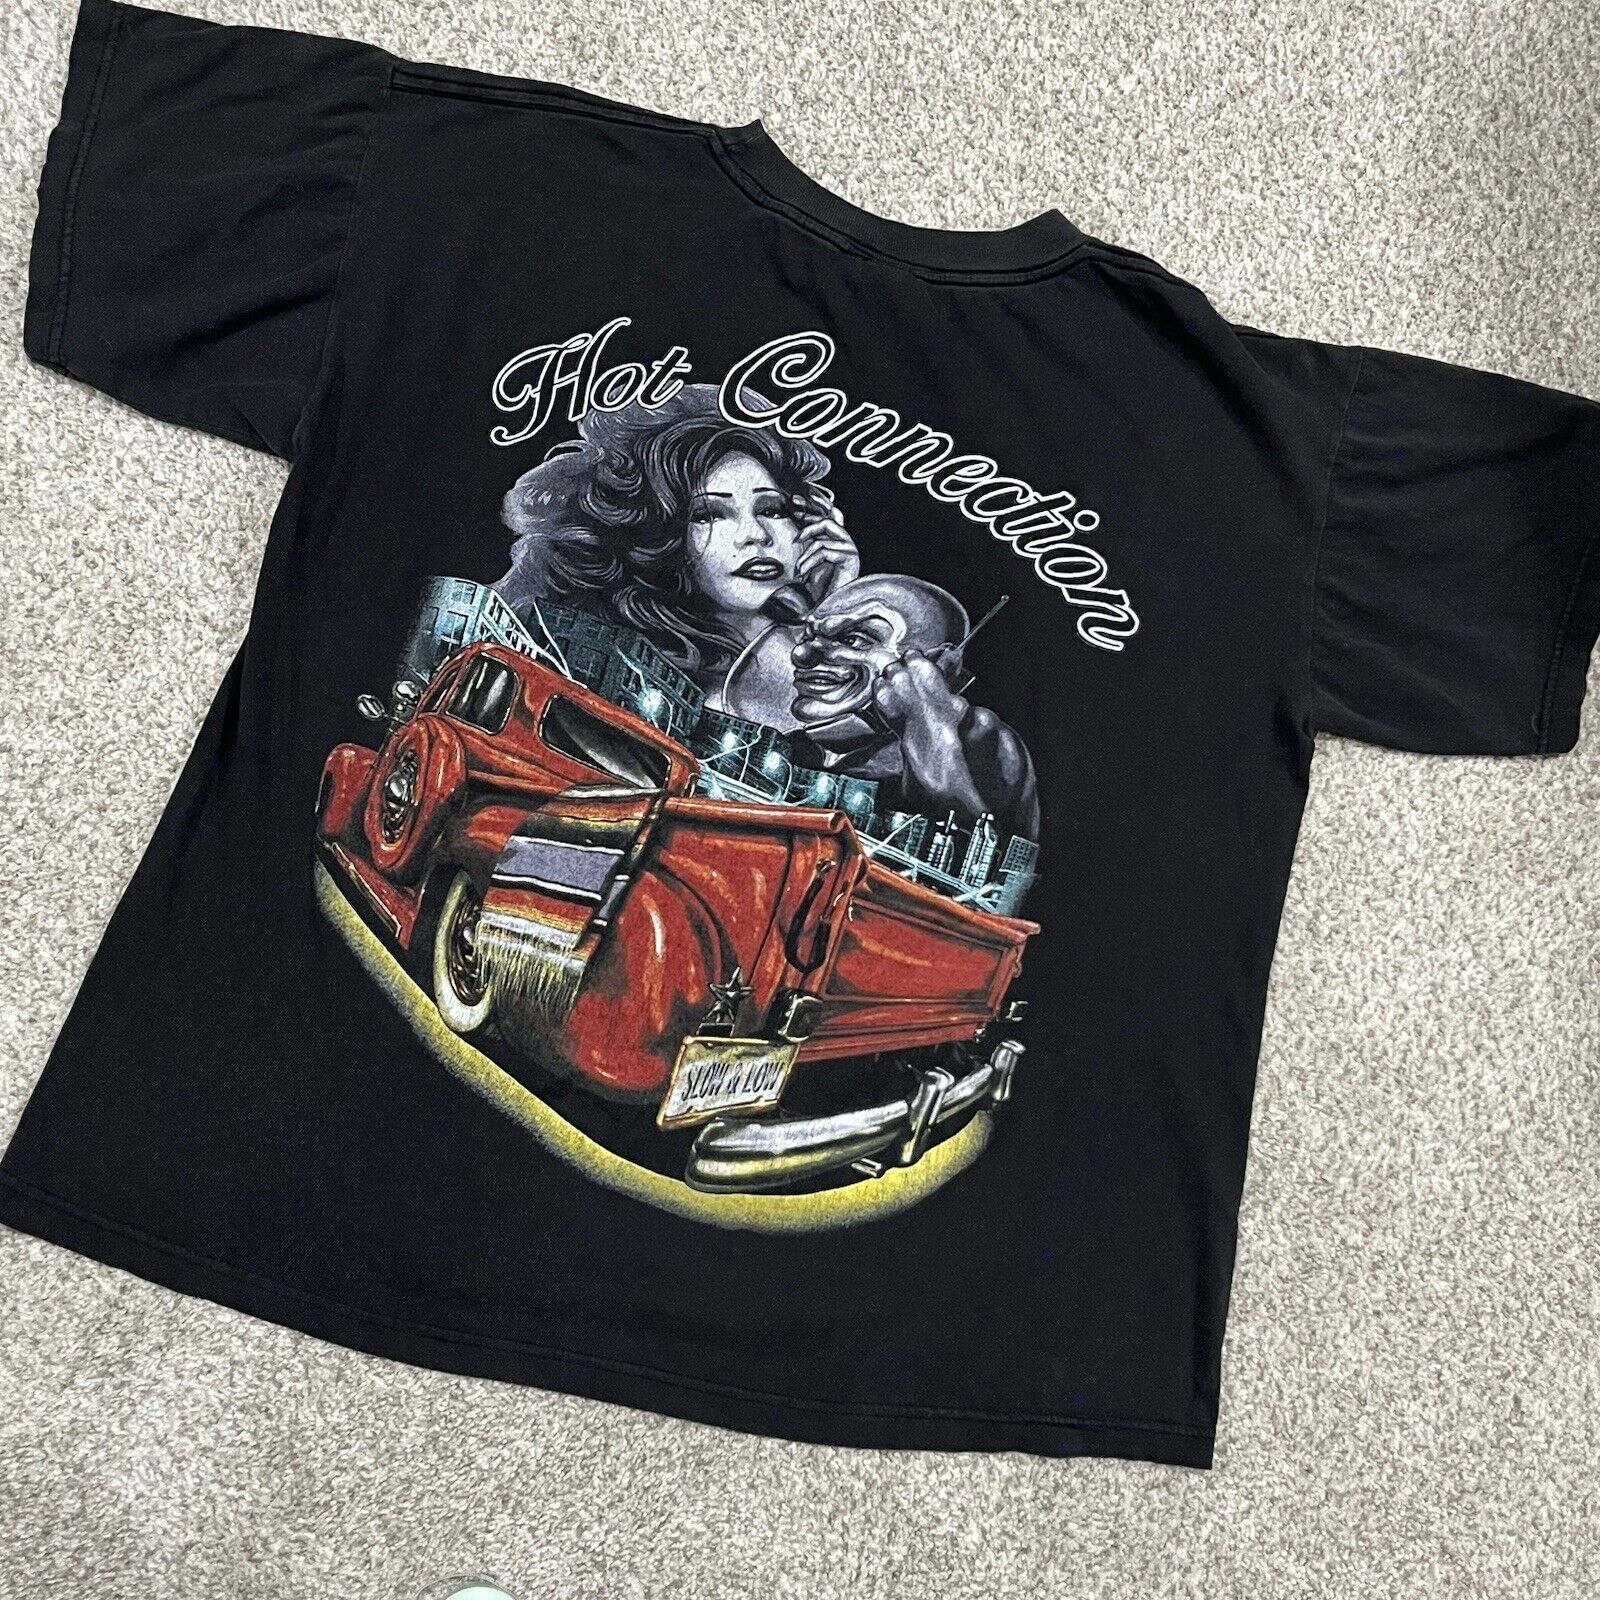 Low Rider T Shirt Large Boxy VTG 90s Black Cholo Art Truck Jester Mexican Pride